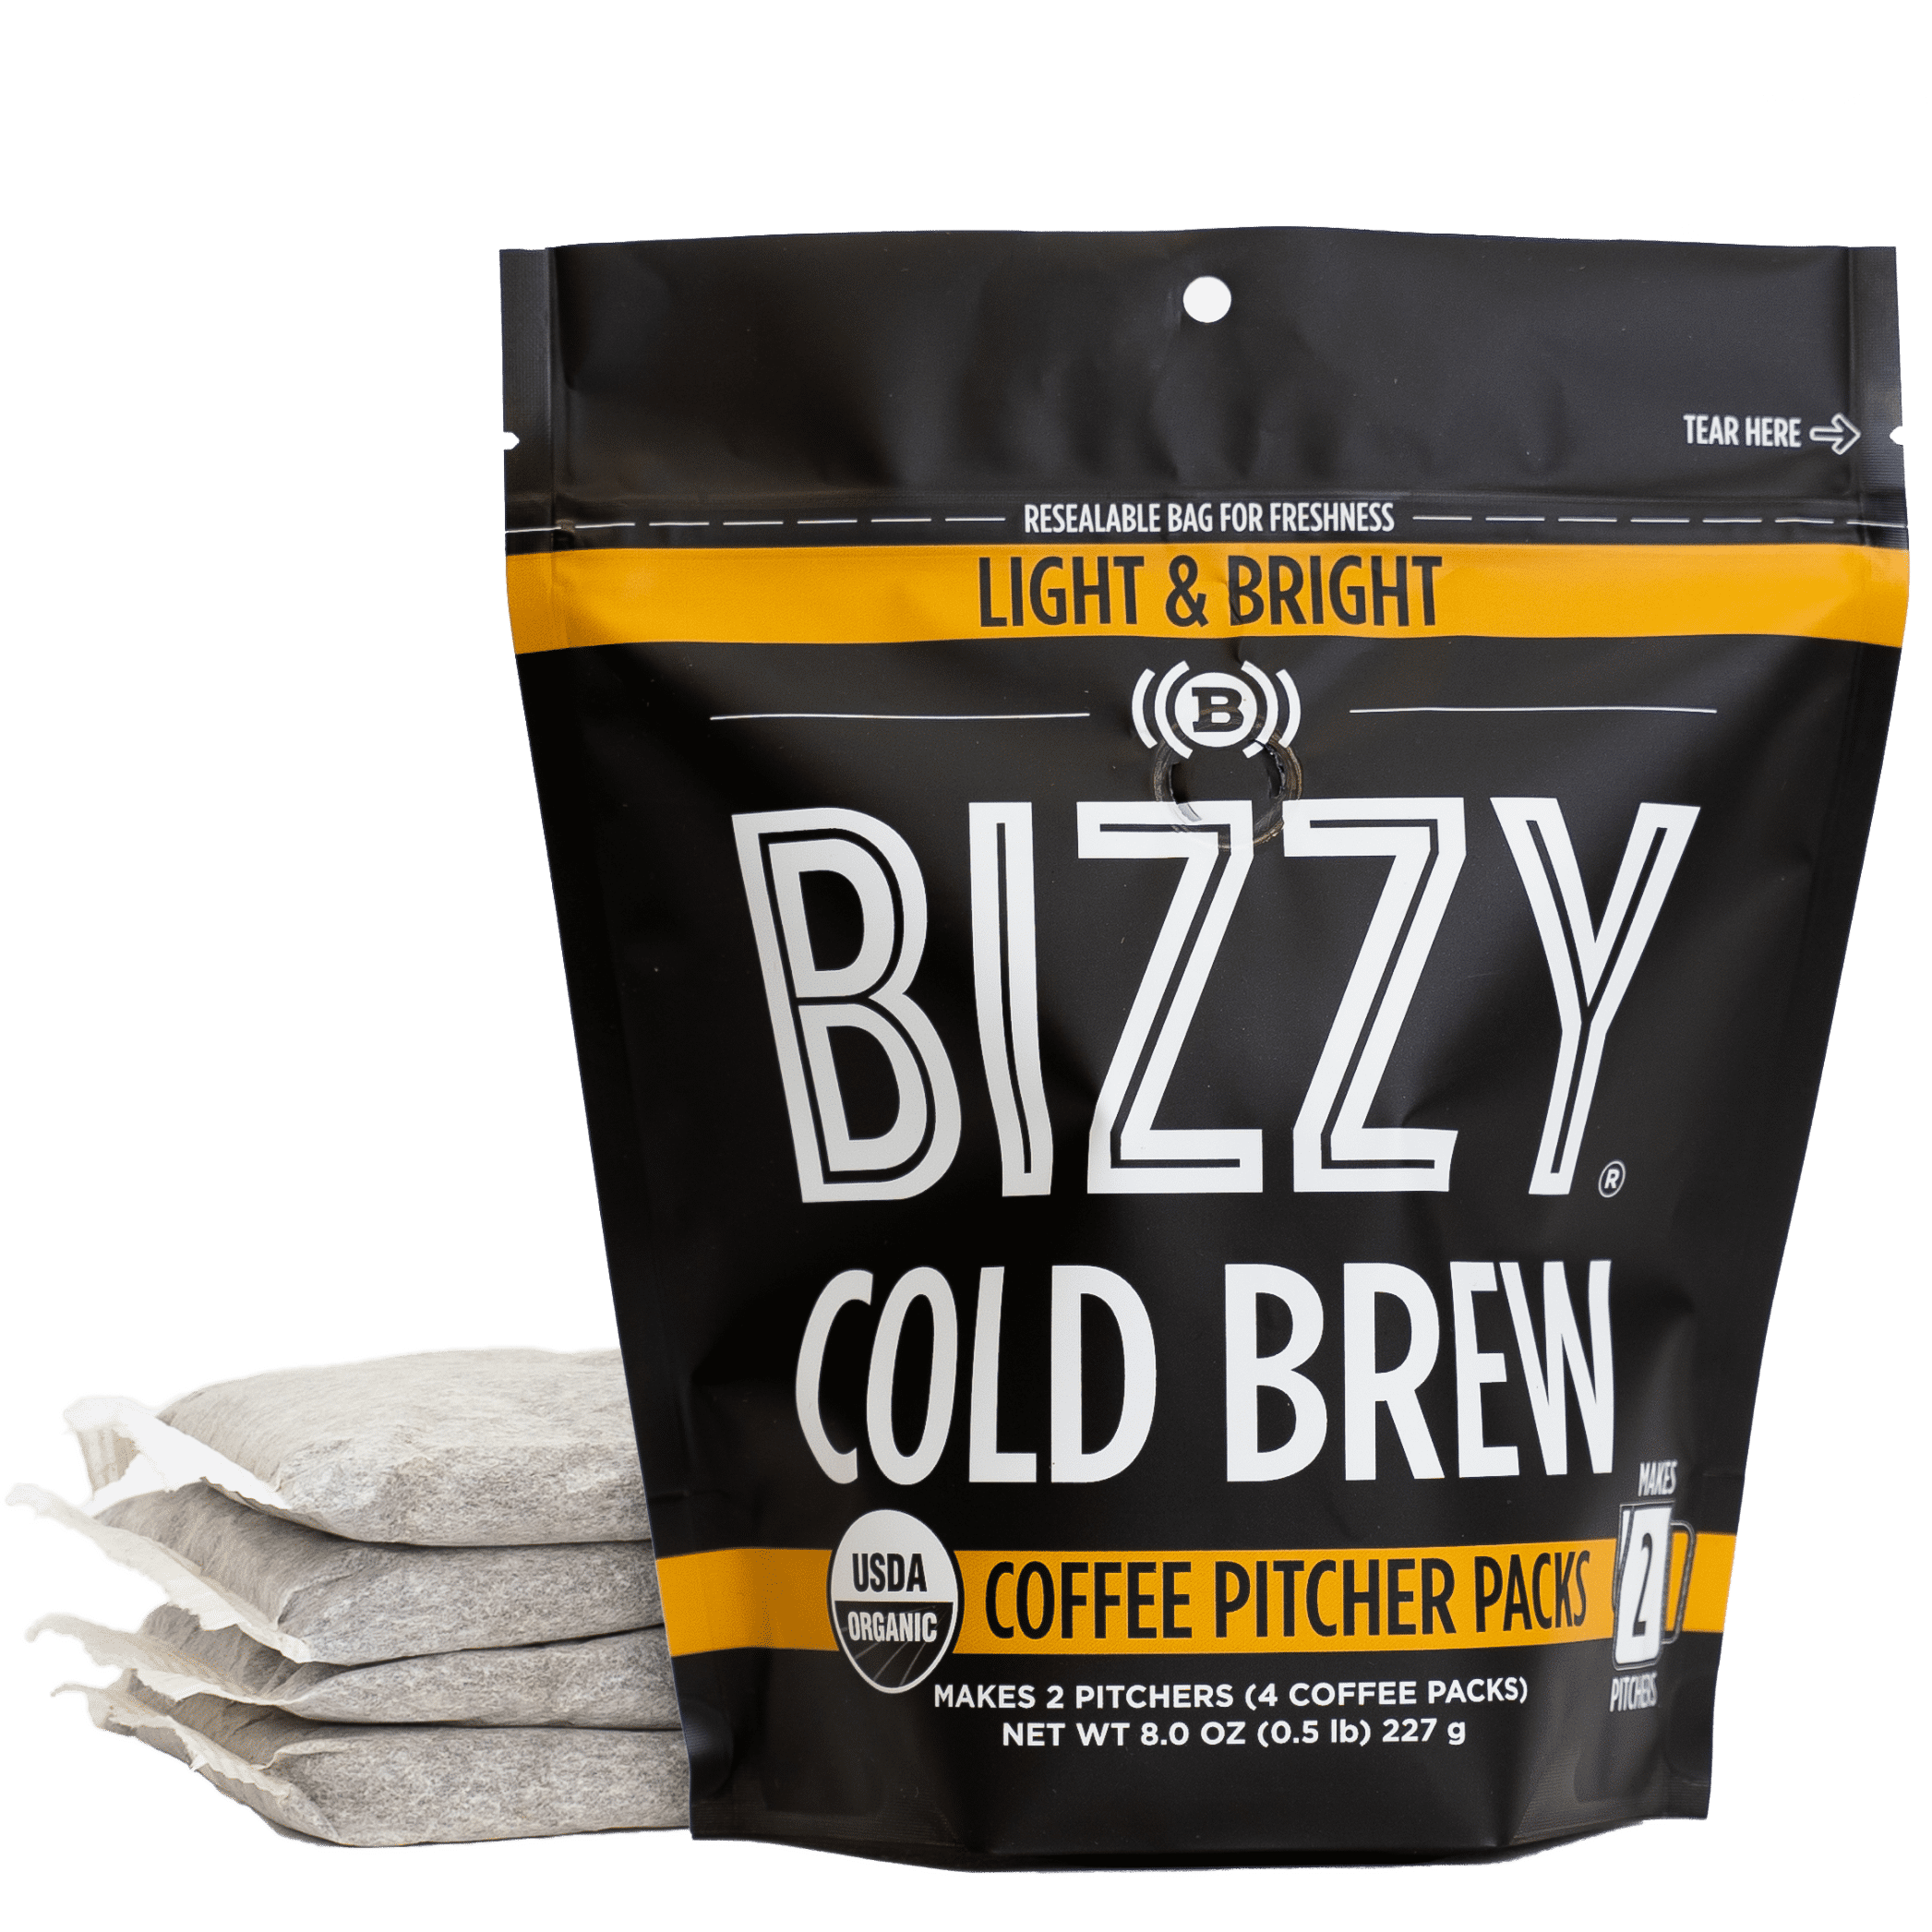 Bizzy Organic Cold Brew Coffee | Light & Bright Blend | Coarse Ground Coffee | Pitcher Packs | 4 Count | Makes 14 Cups